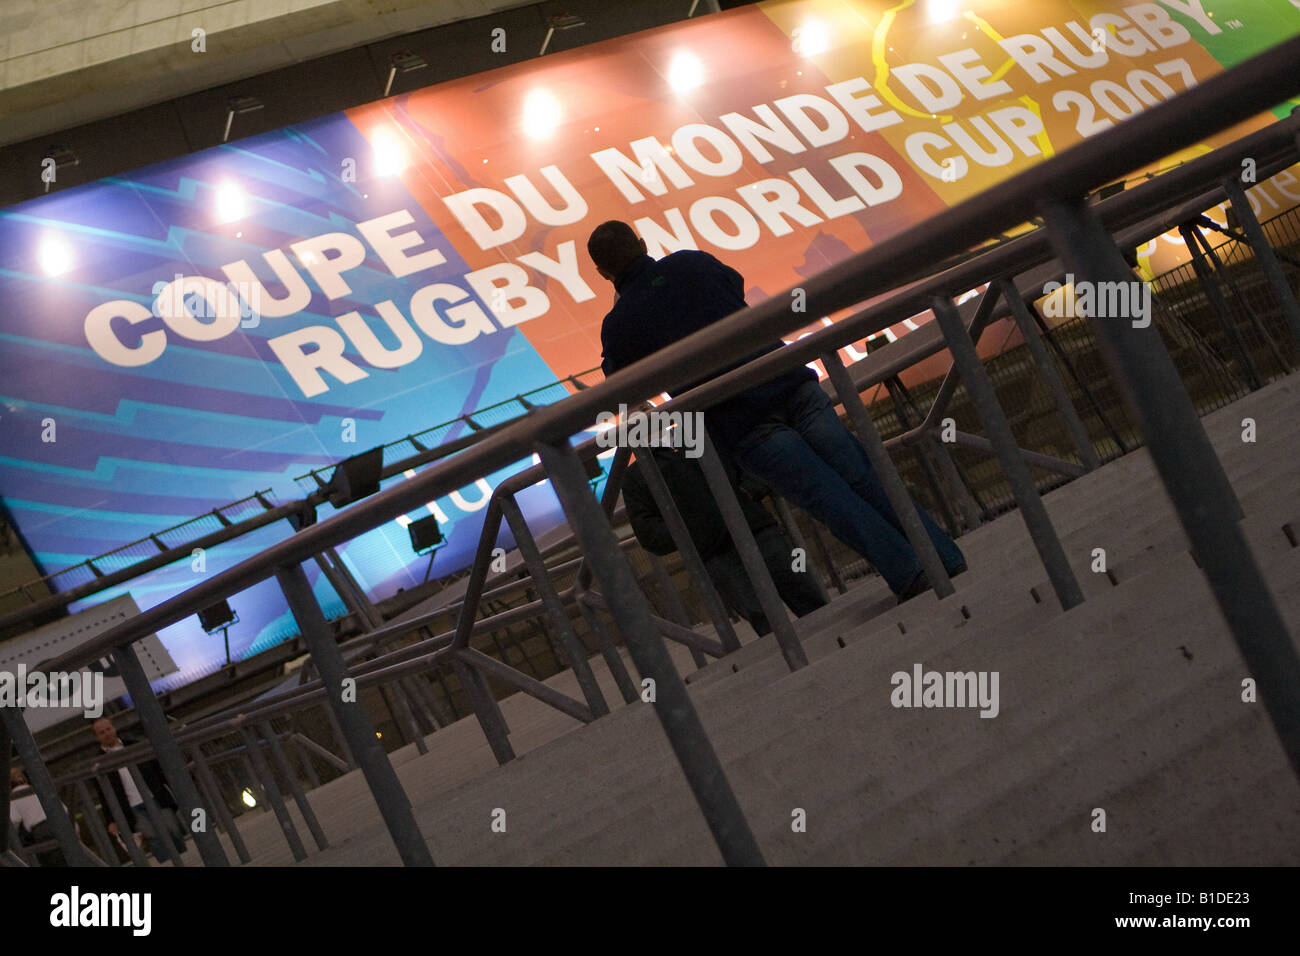 Colourful sign at entrance of Stade de France rugby stadium, Paris, France on evening of rugby world cup final, 20 October 2007 Stock Photo